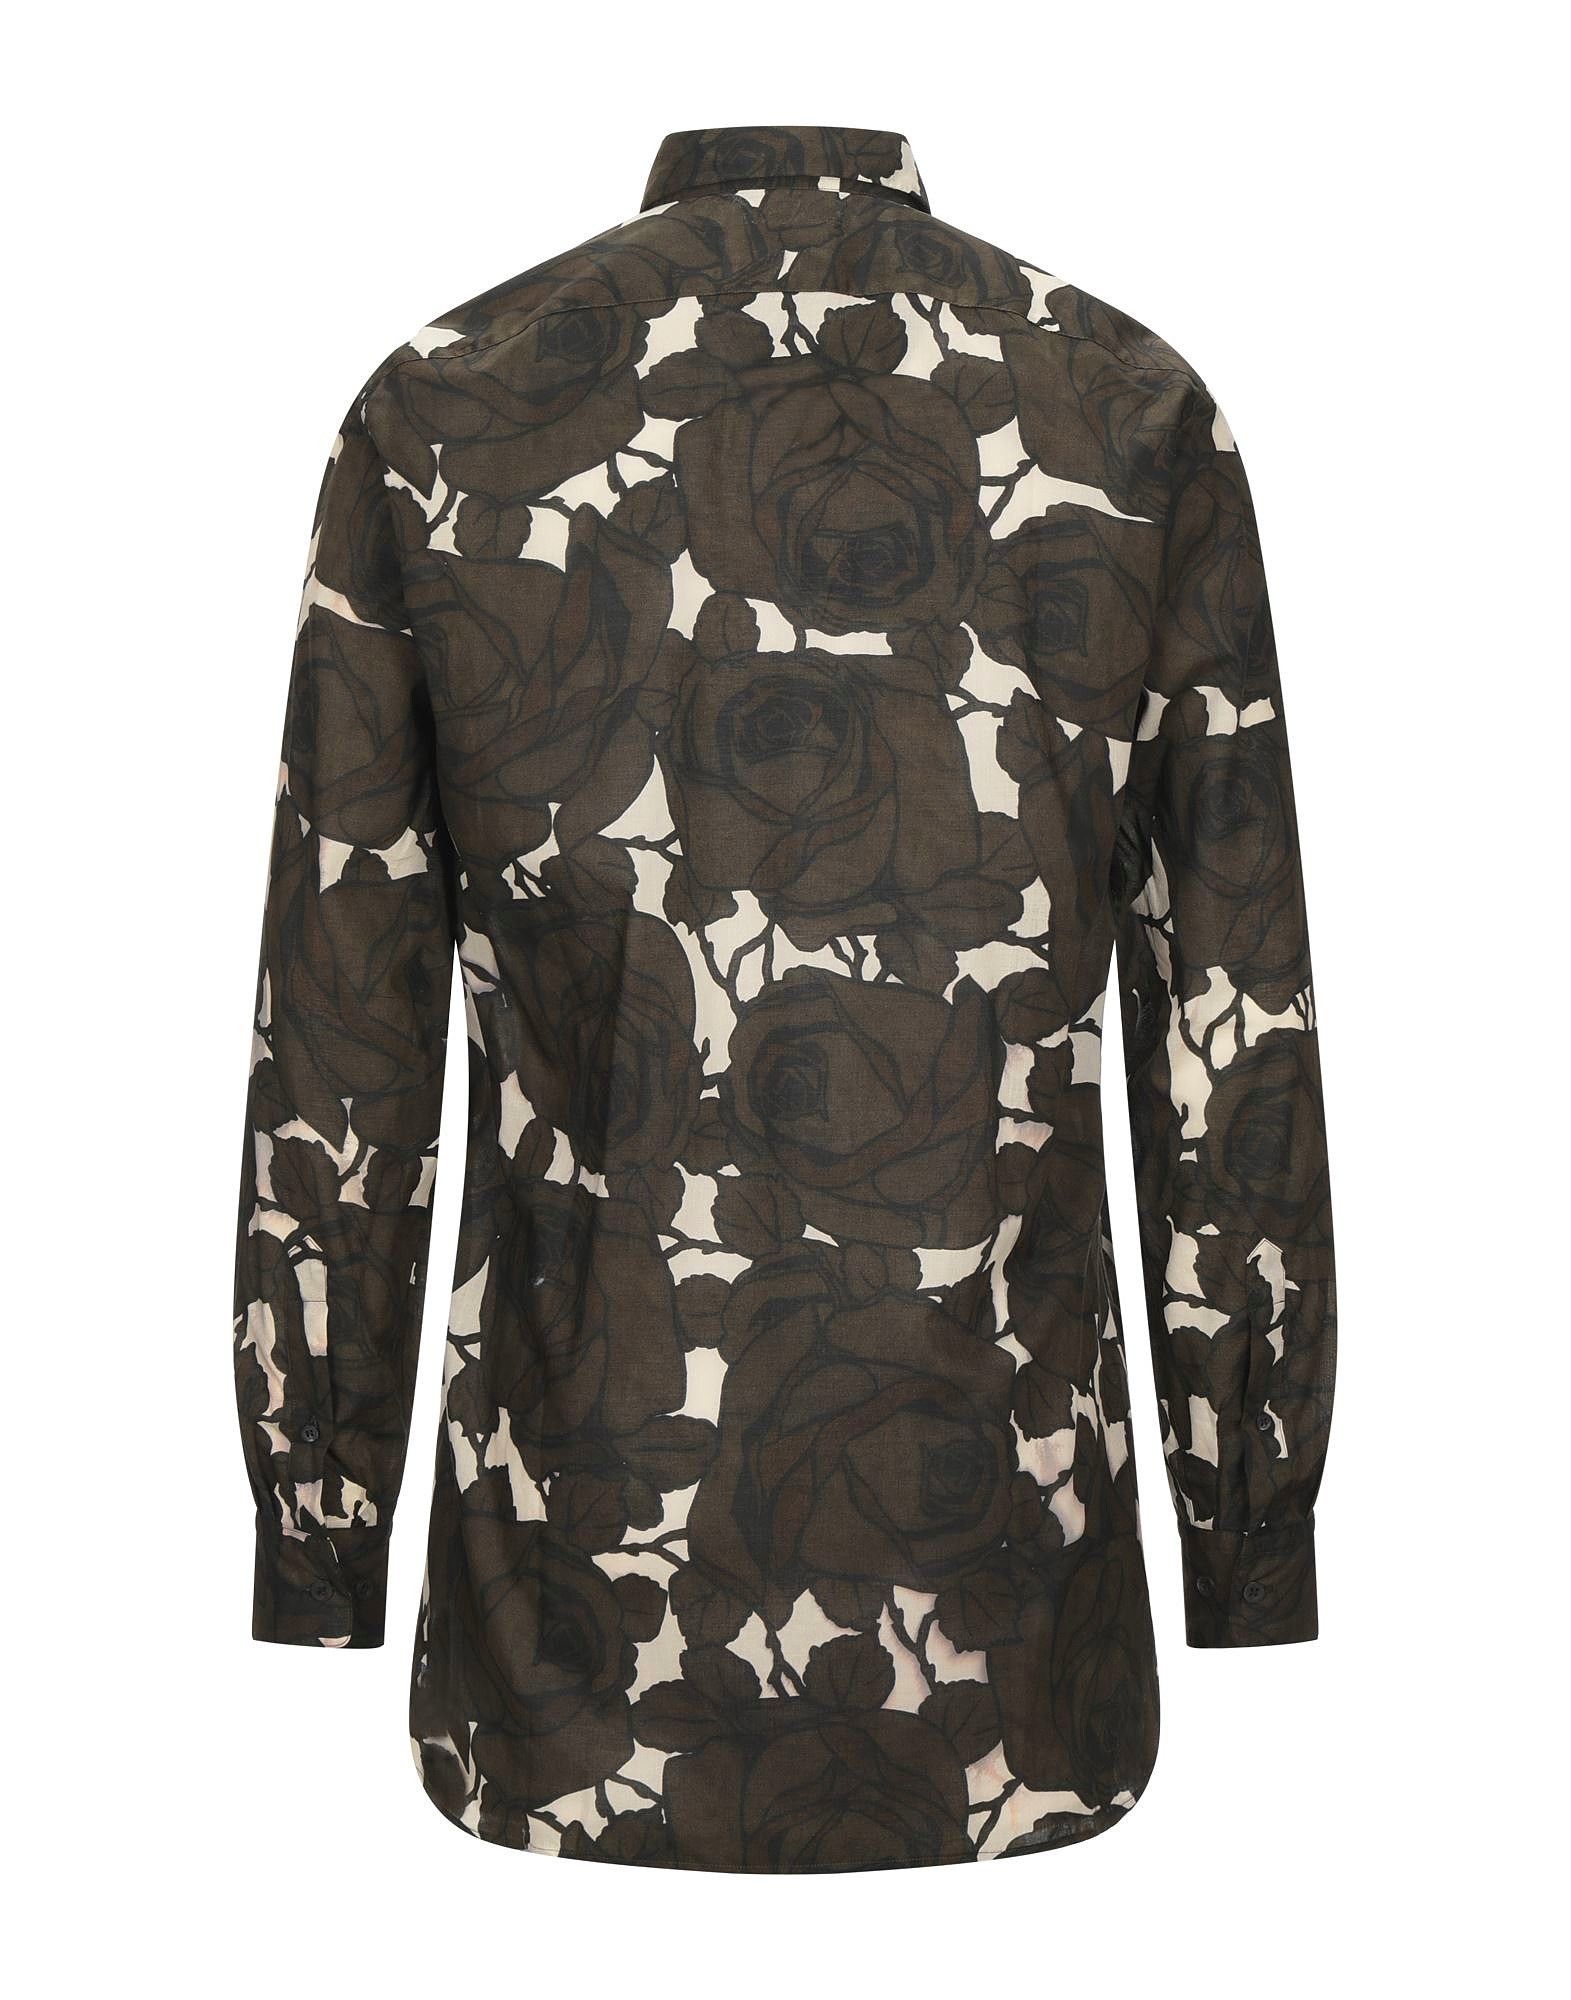 Dries Van Noten Patterned Shirts in Cocoa | Grailed